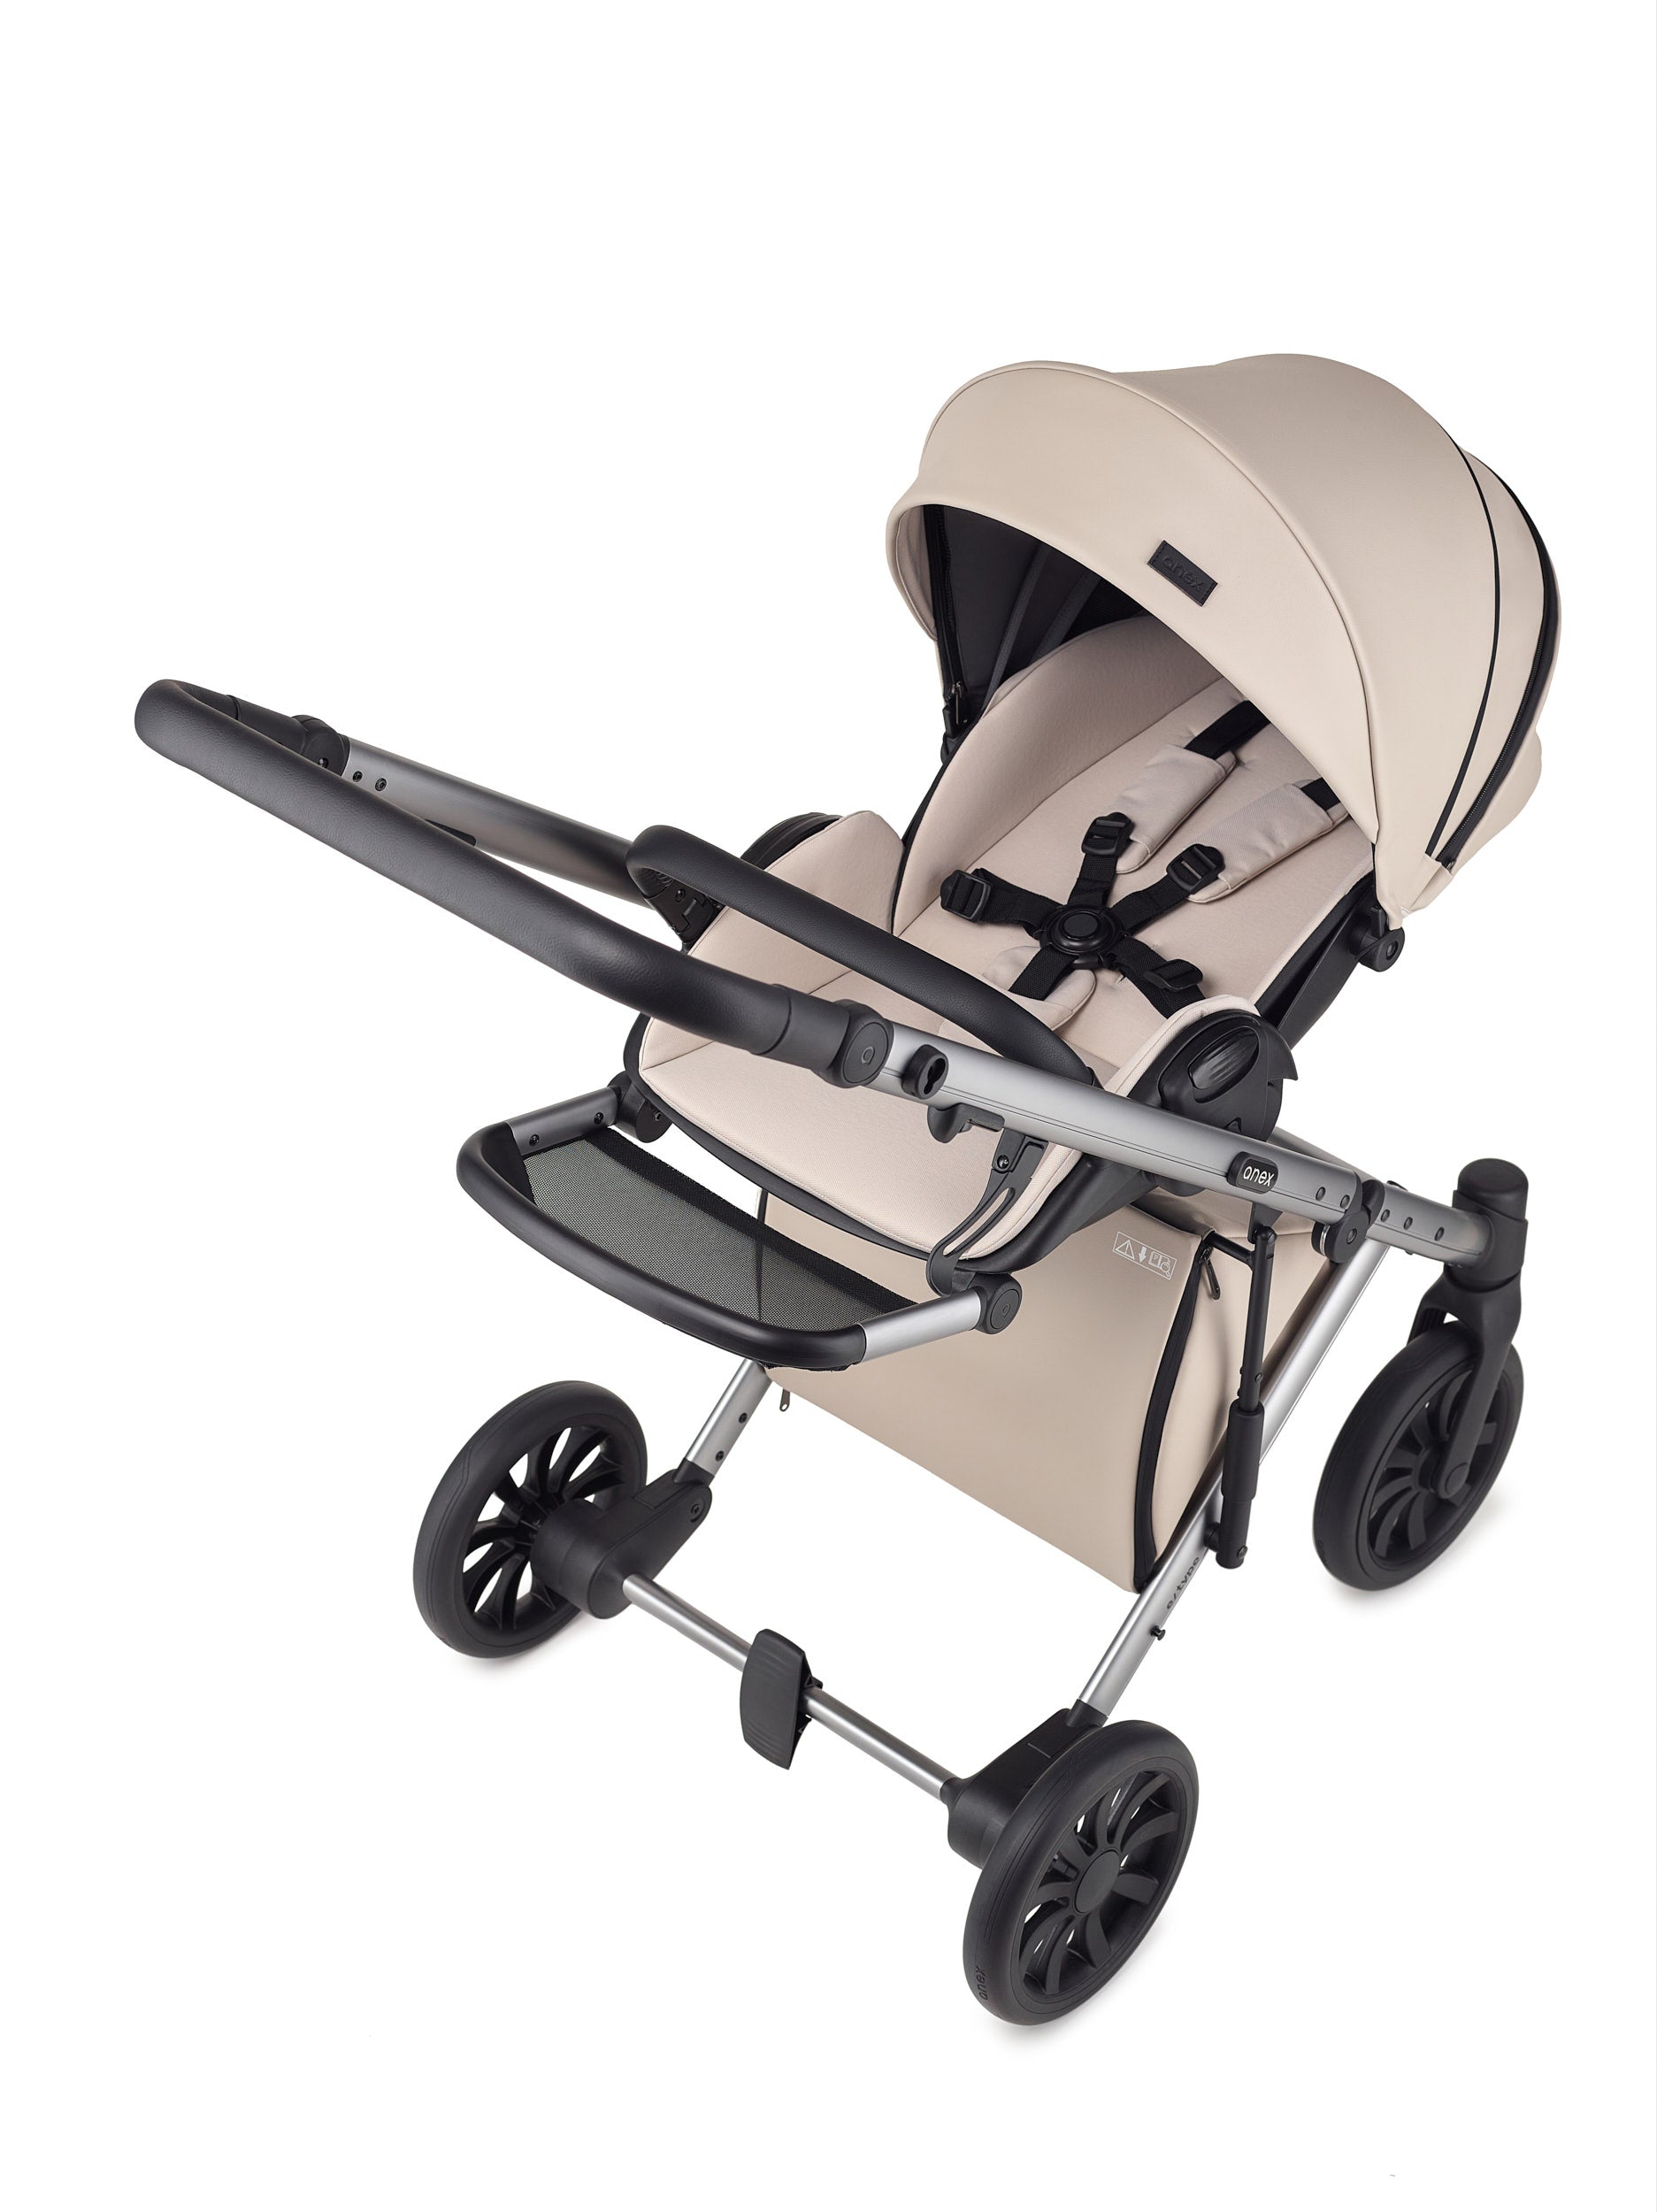 Anex Baby Stroller System with Carrycot E type Soul – BEBIZON